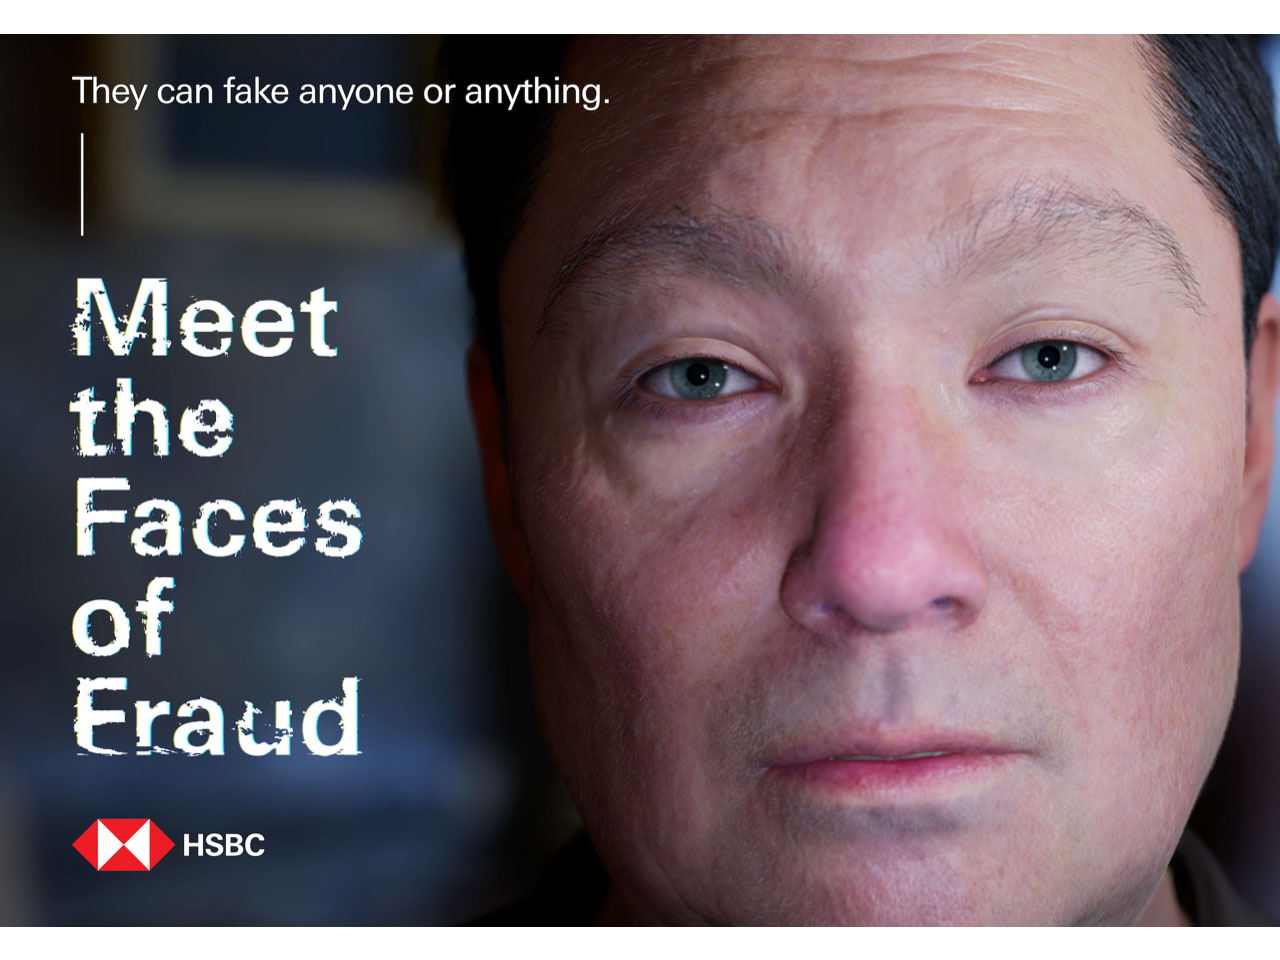 New and innovative HSBC campaign by Wunderman Thompson UK reveals the real faces of fraudsters 